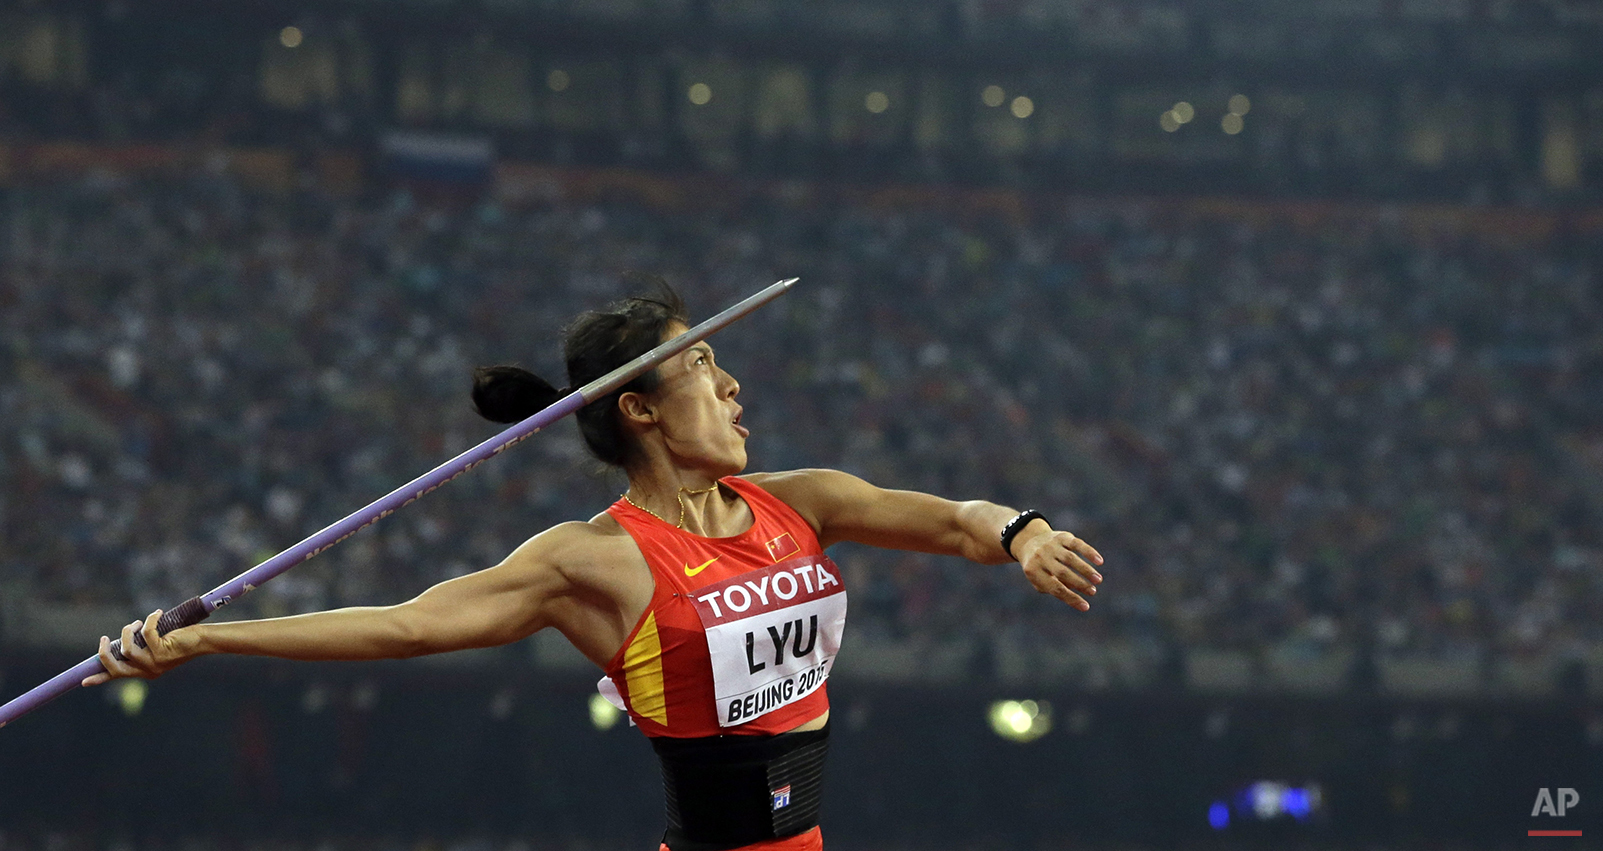  China's Lyu Huihui in action on her way to taking the silver medal in the women's javelin final at the World Athletics Championships at the Bird's Nest stadium in Beijing, Sunday, Aug. 30, 2015. (AP Photo/Lee Jin-man) 